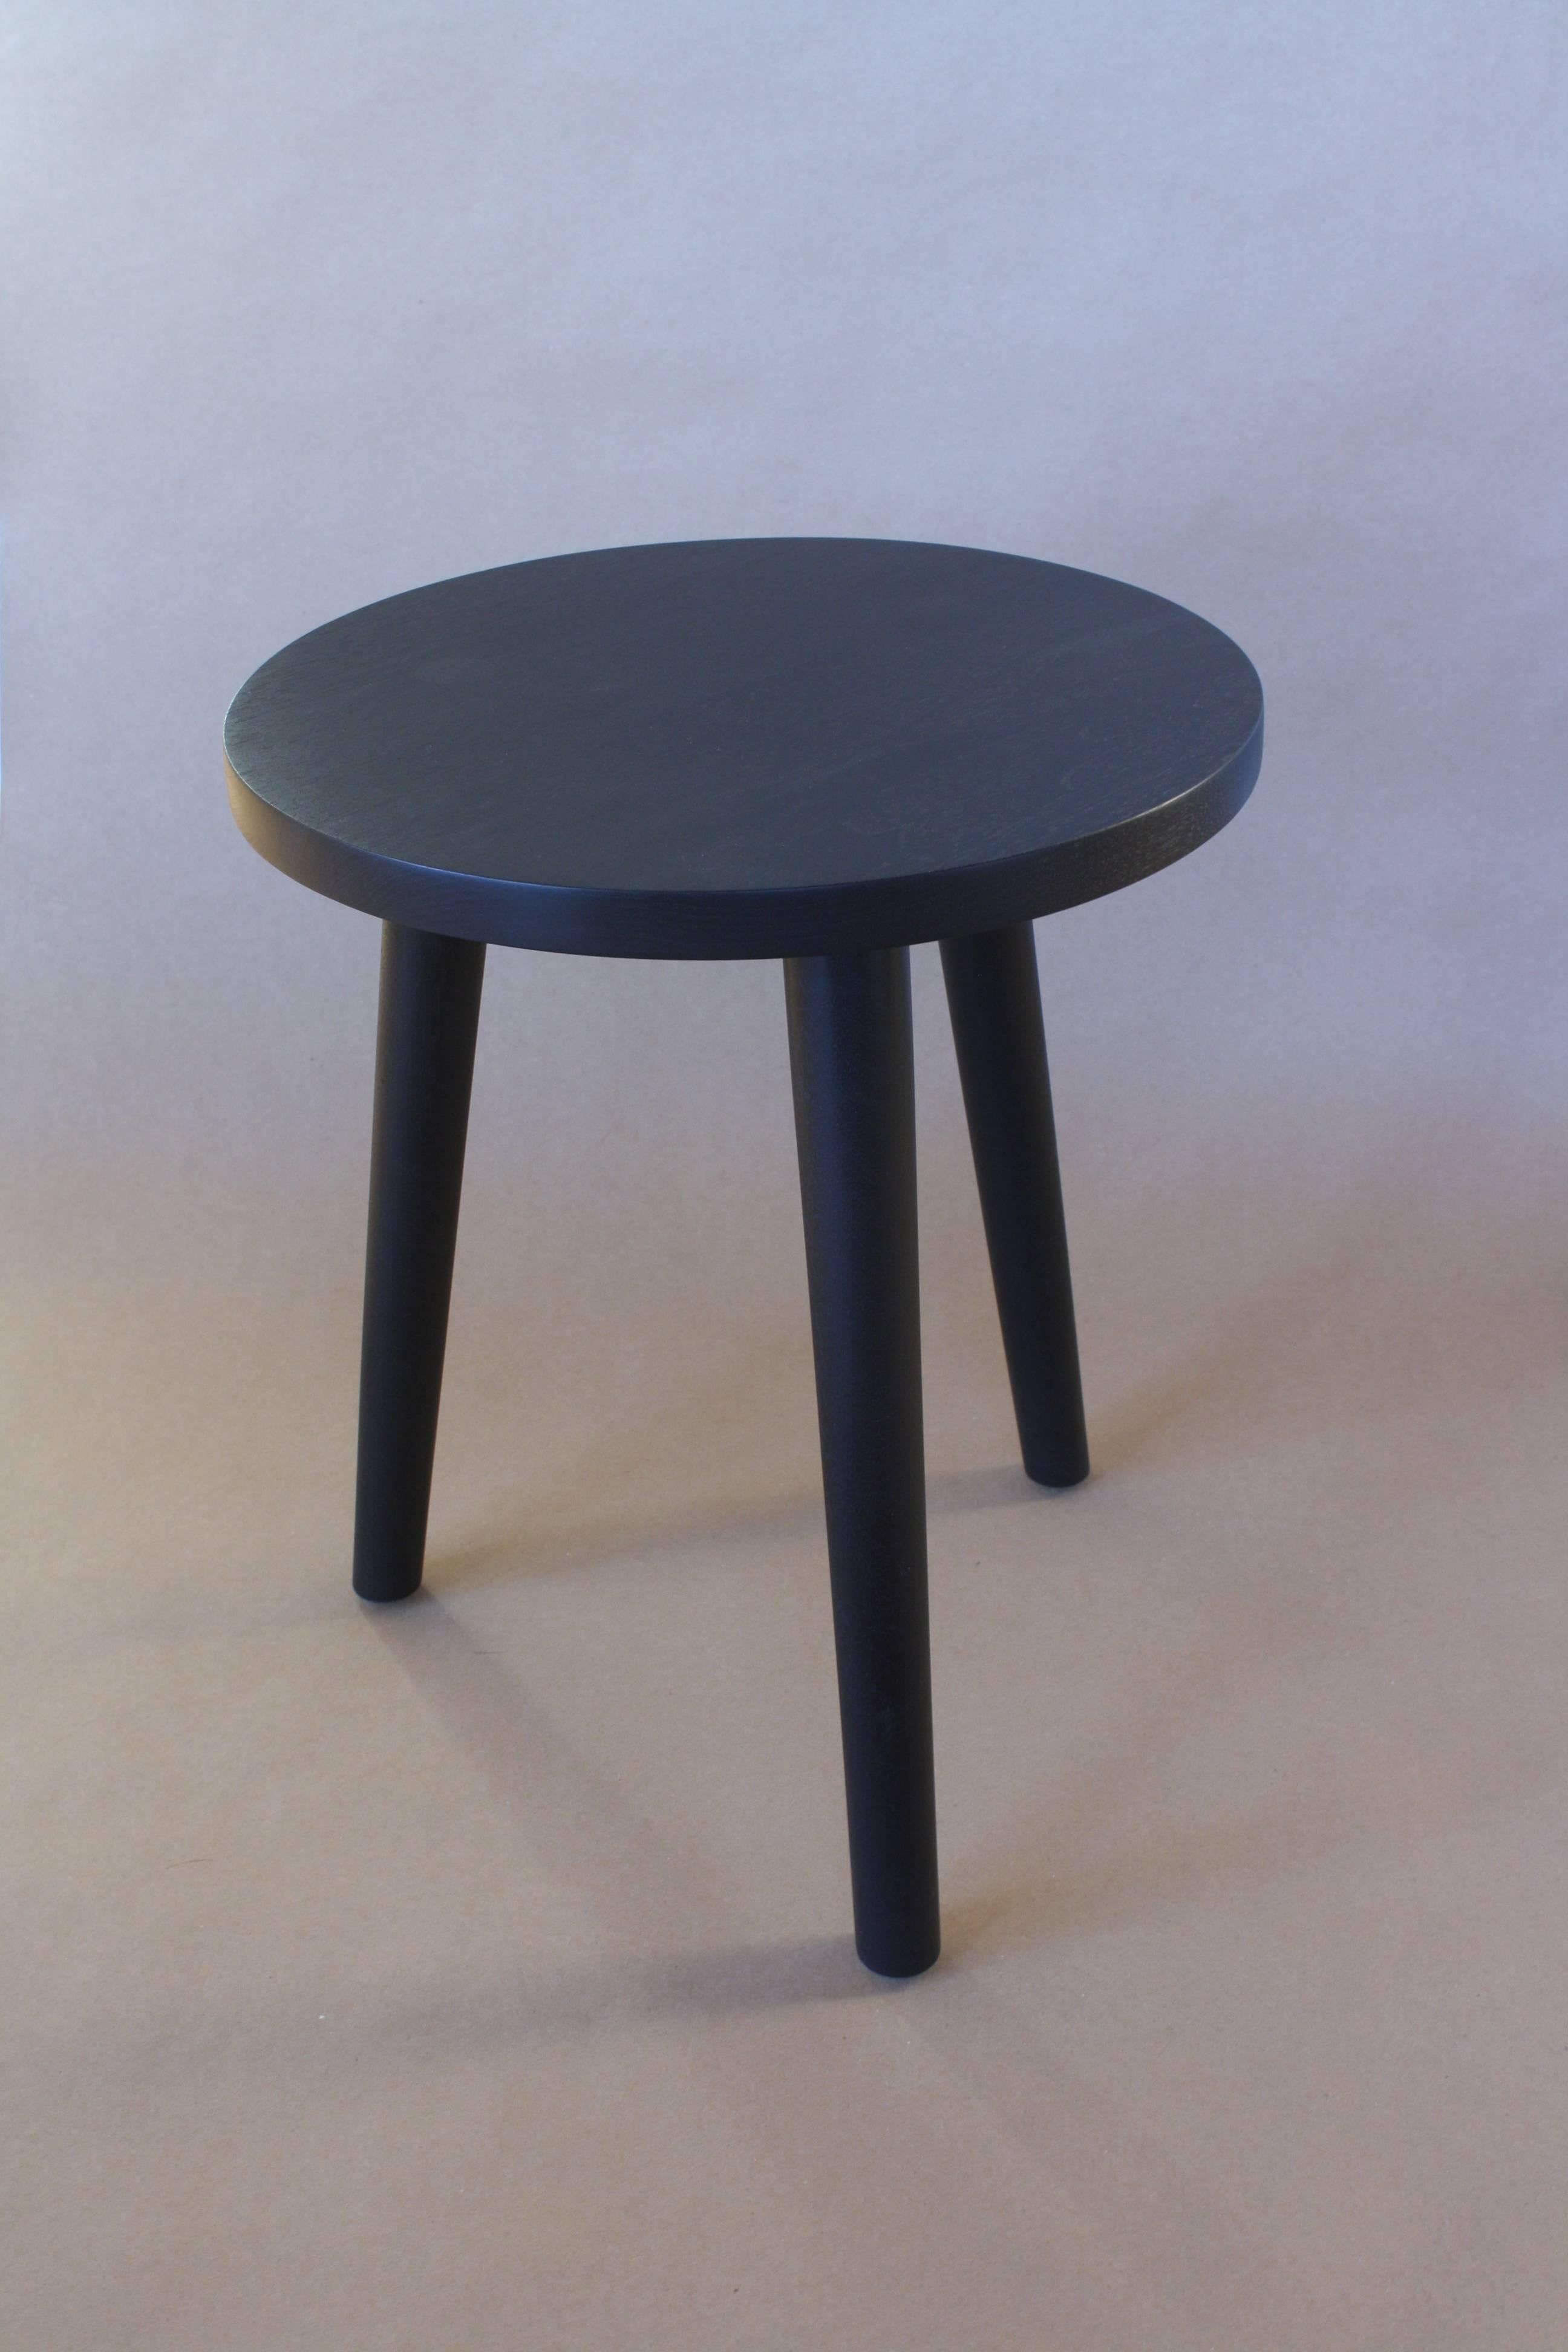 American Ebonized Walnut, A Solid Wood Stool or Side Table with Turned Legs For Sale